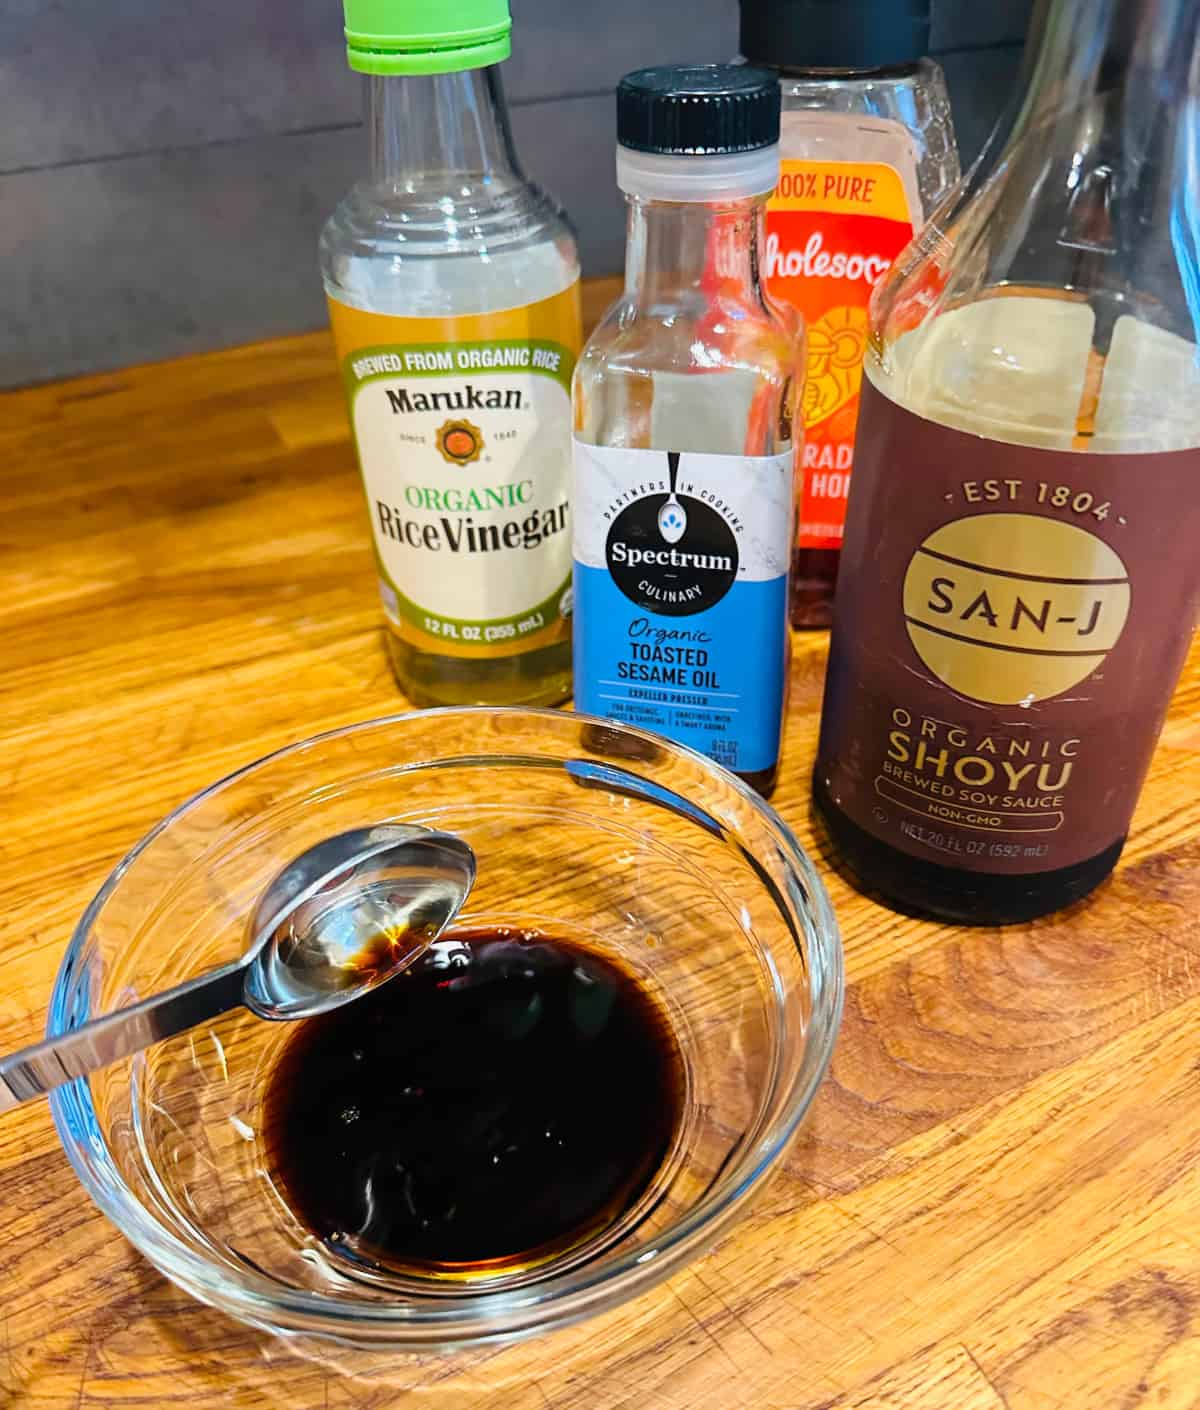 Shoyu being poured from a steel tablespoon into a small glass bowl next to bottles of shoyu, rice vinegar, toasted sesame oil, and honey.